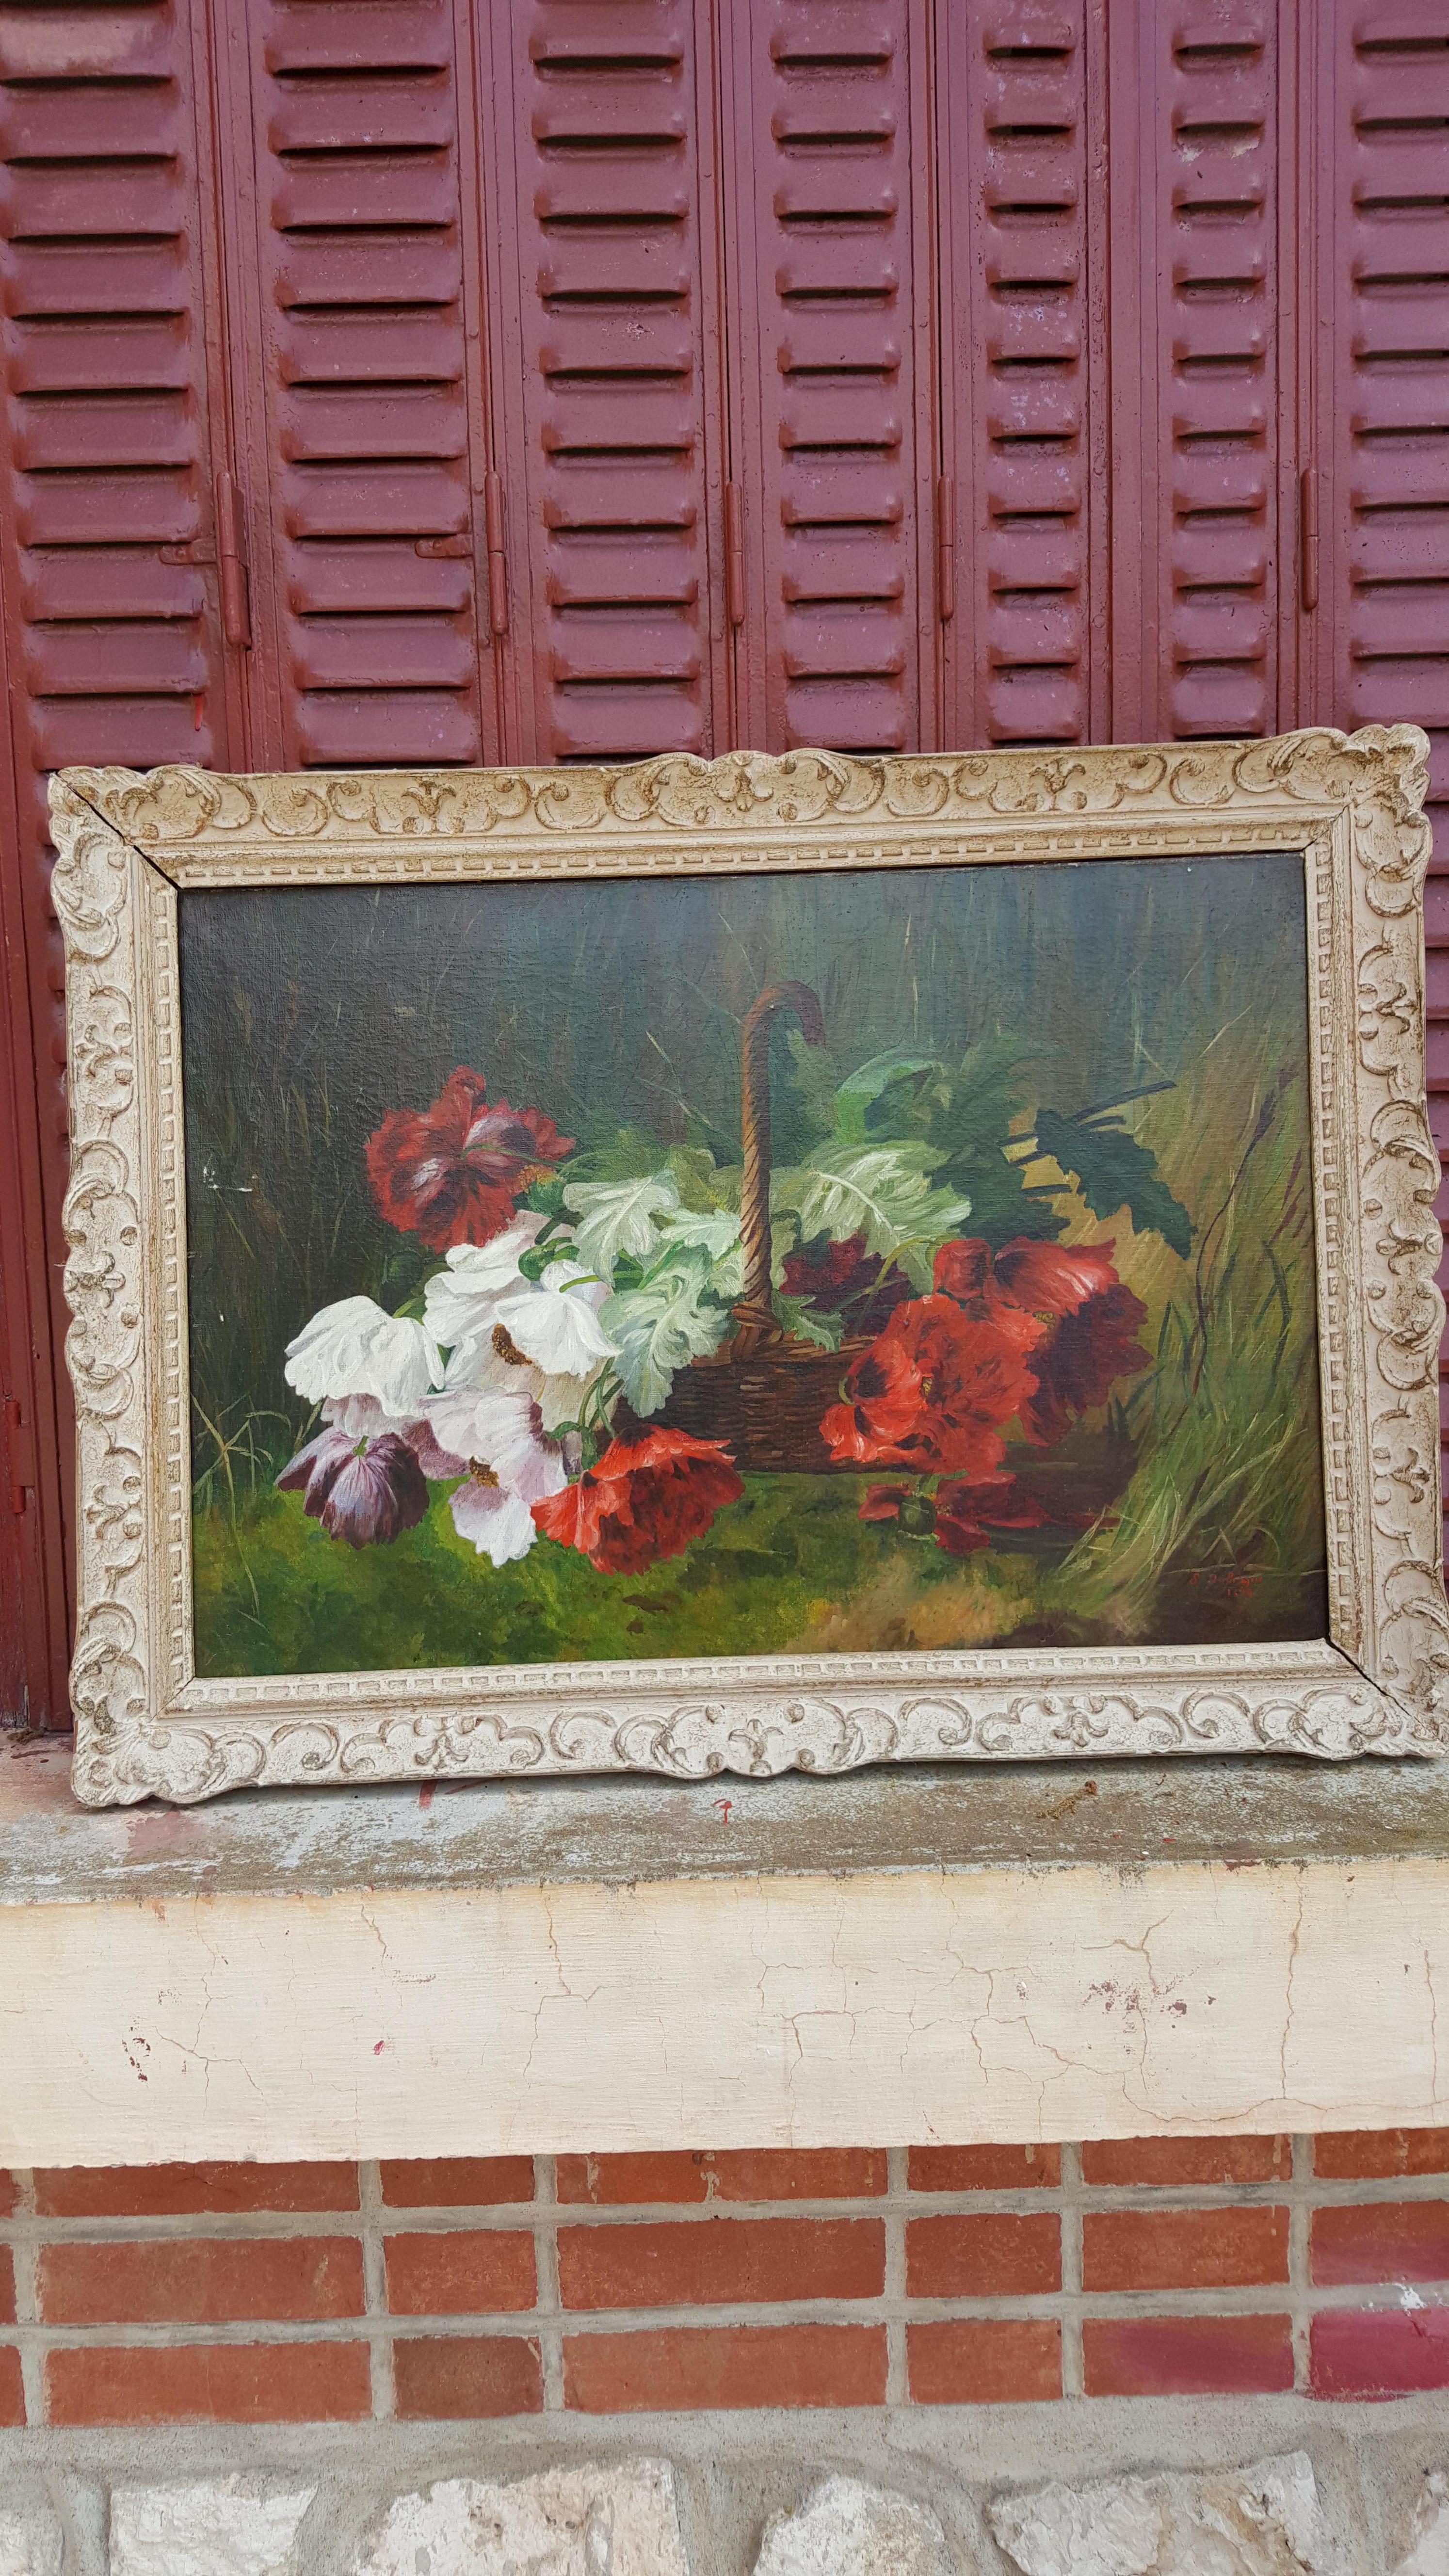  Red Flower Basket  - Impressionist Painting by Unknown